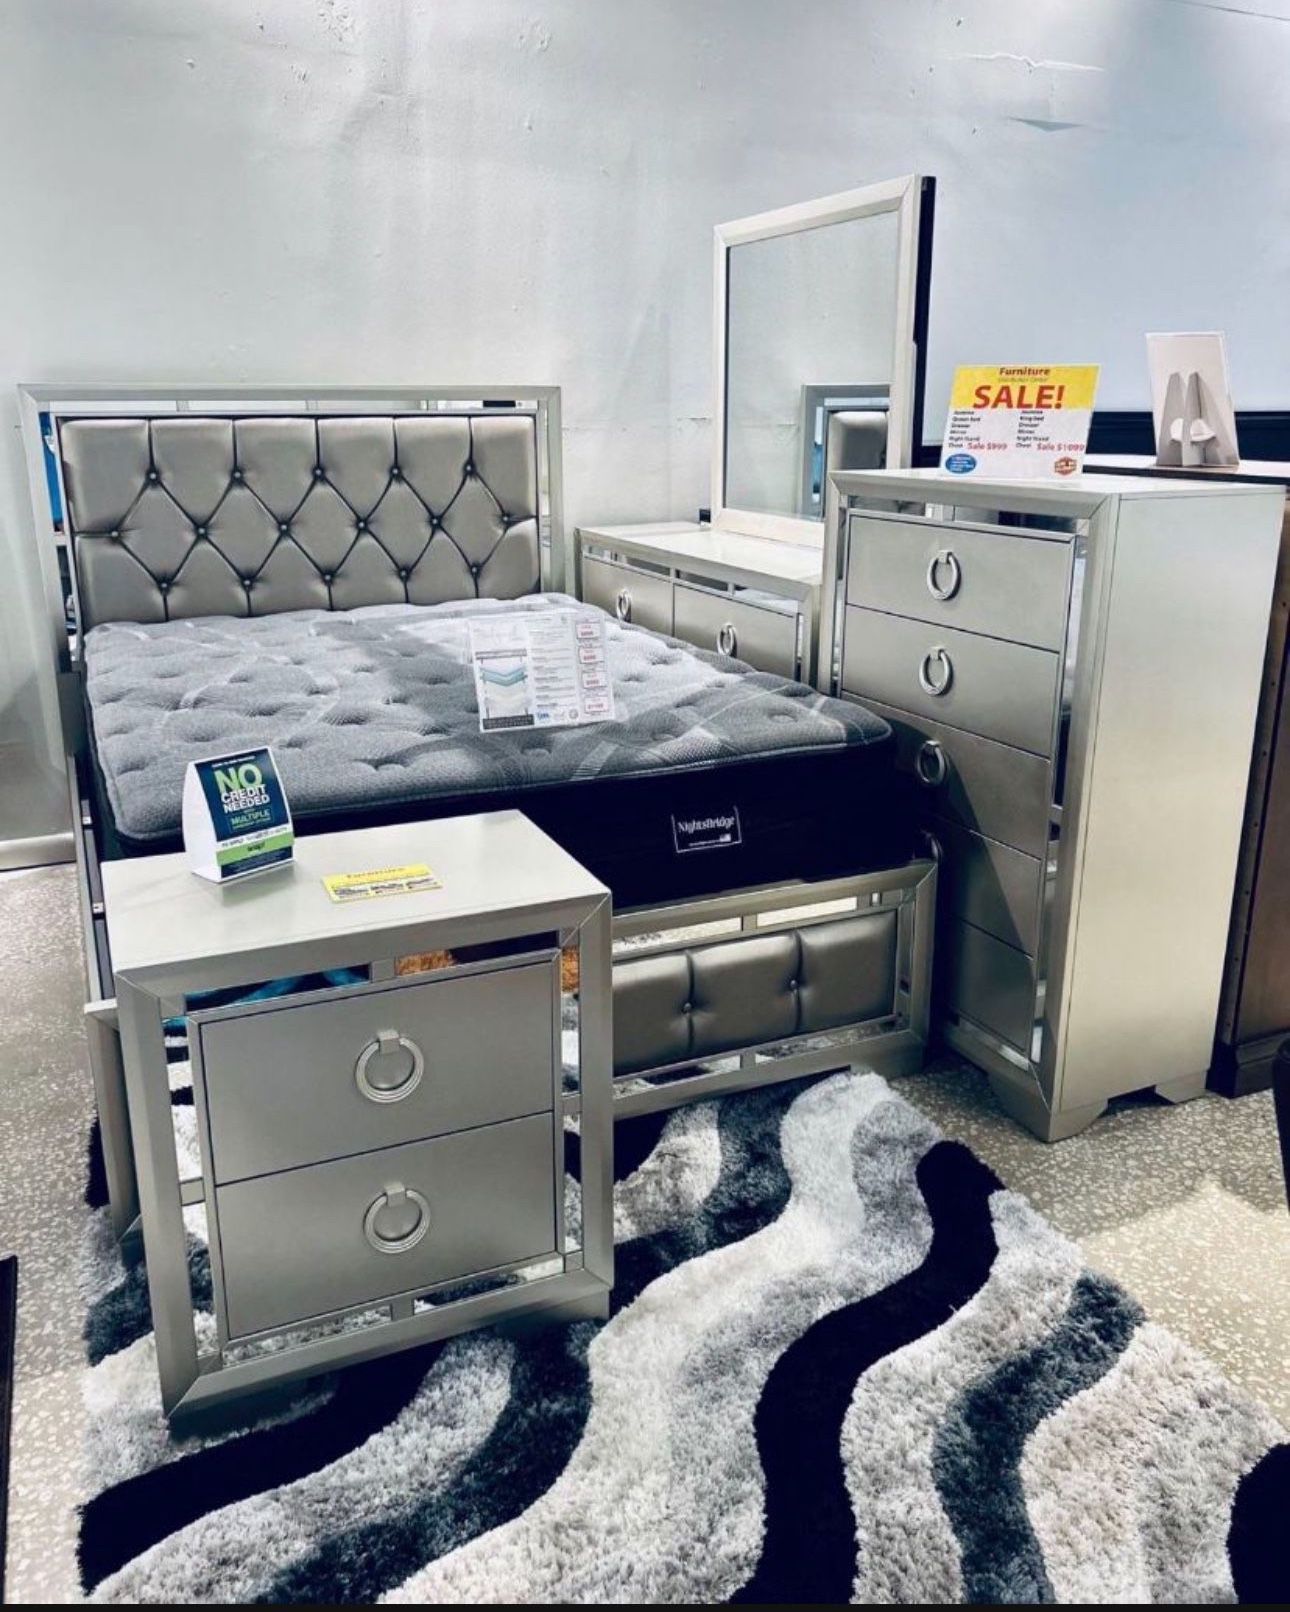 BEAUTIFUL NEW JASMINE QUEEN BEDROOM SET ON SALE ONLY $899. IN STOCK SAME DAY DELIVERY 🚚 EASY FINANCING 